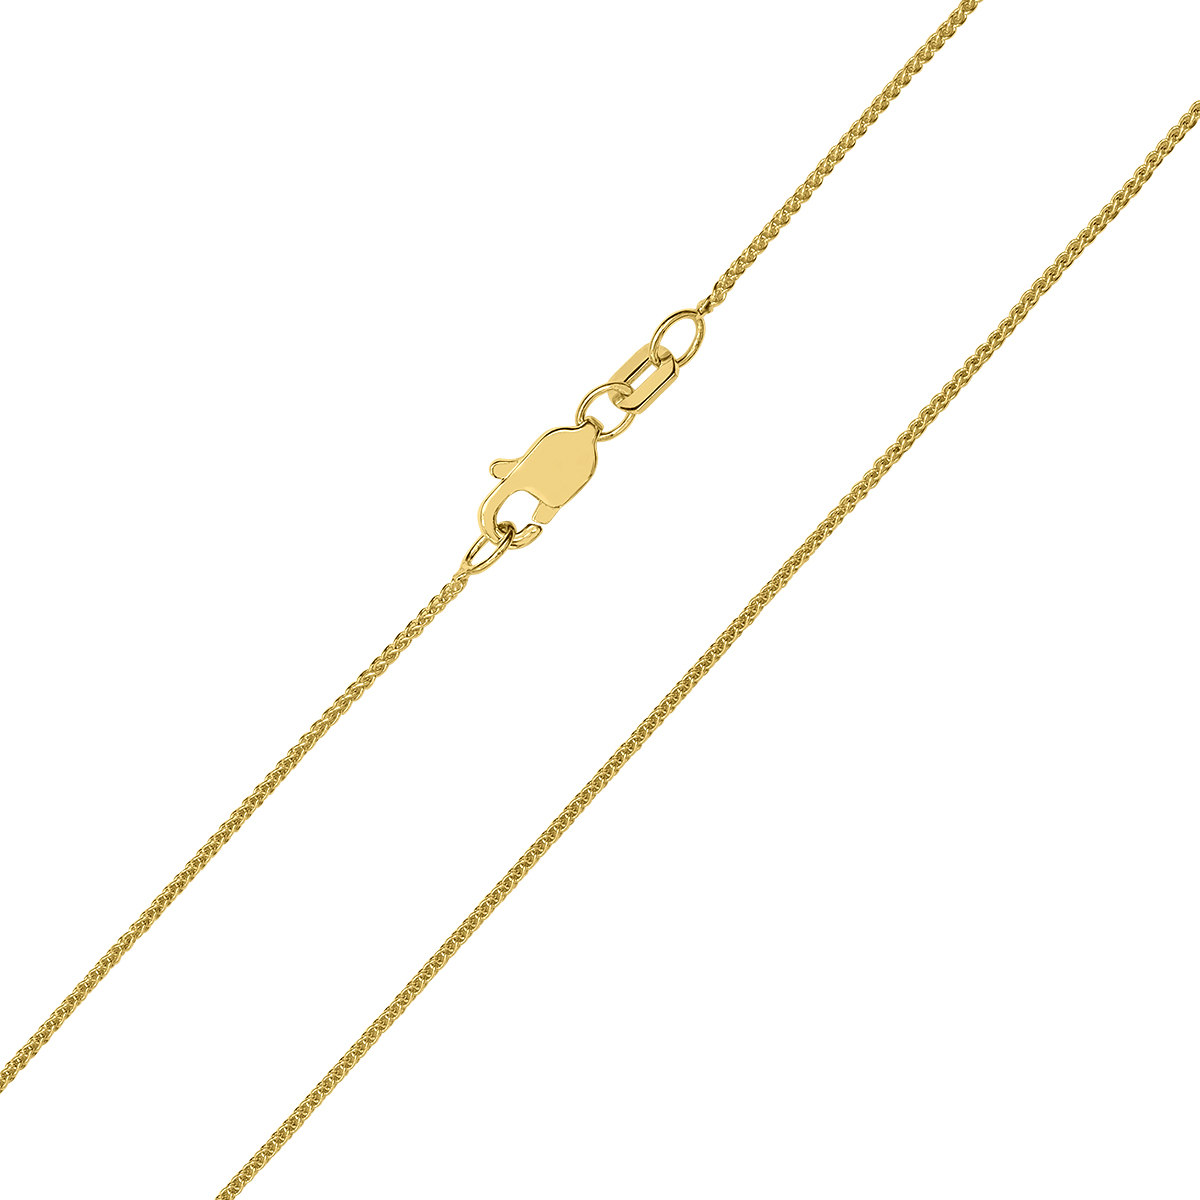 10K Yellow Gold 0.6mm Round Wheat Chain with Lobster Clasp - 18 Inch